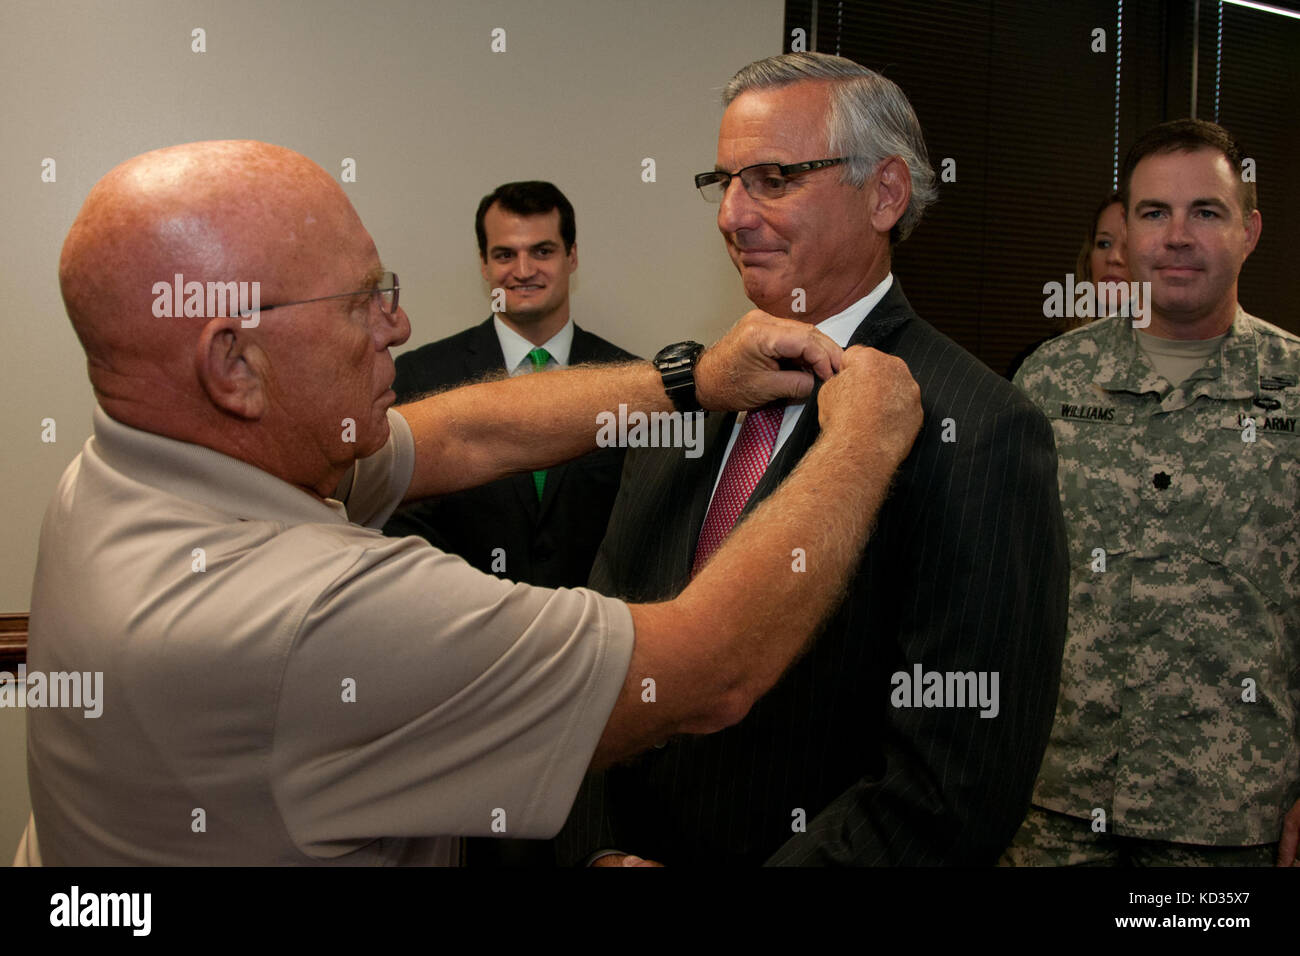 U.S. Army Maj. Gen. Robert E. Livingston, Jr., the adjutant general for South Carolina, presents the South Carolina Employer Support of Guard and Reserve Patriot Award to Mr. Will McMaster of Morgan Stanley at the Joint Force Headquarters building, South Carolina National Guard, Columbia, South Carolina, Aug. 27, 2015. The Patriot award is awarded to individual supervisors who demonstrate exceptional support to National Guard Citizen Soldiers and Airmen who perform their duties to the state and nation. During the event, an ESGR statement of support was signed demonstrating the company’s contin Stock Photo